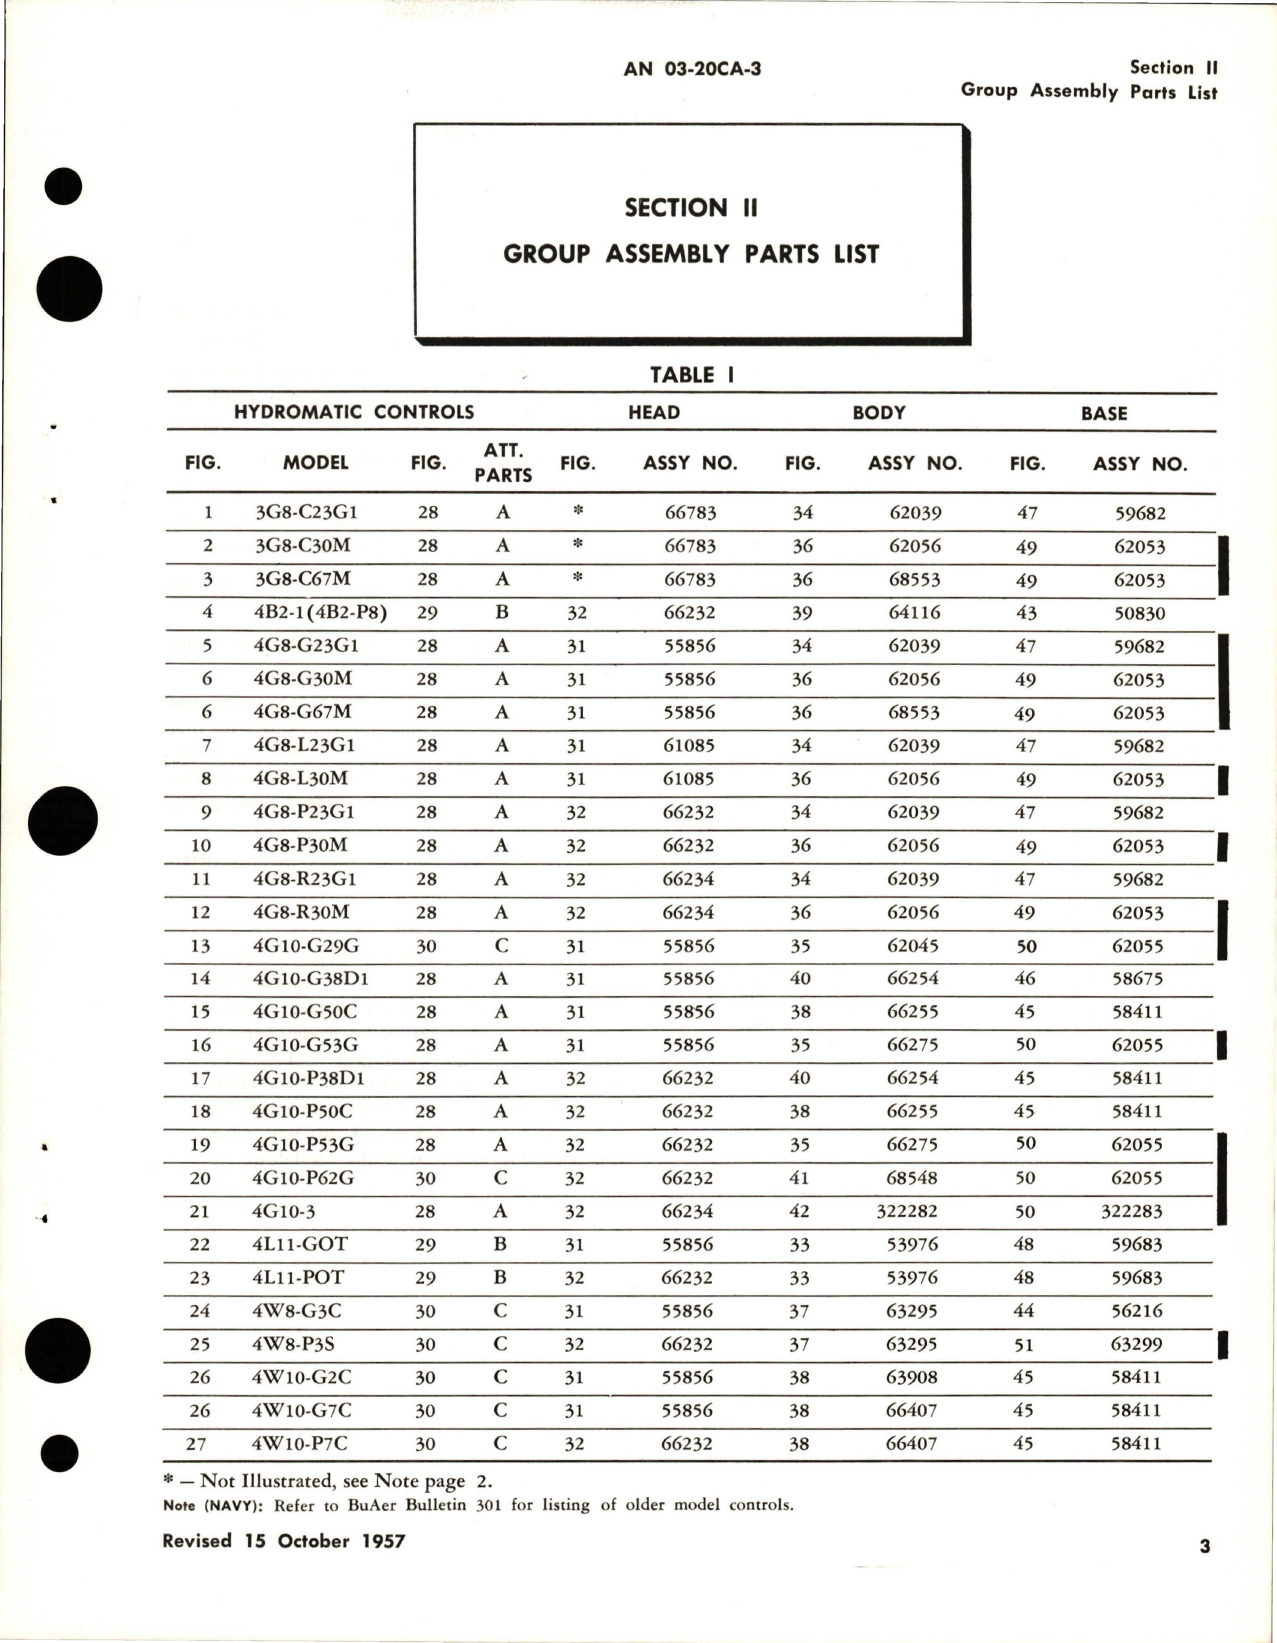 Sample page 7 from AirCorps Library document: Illustrated Parts Breakdown for Single Acting Constant Speed Control Assemblies for Hydromatic Propellers